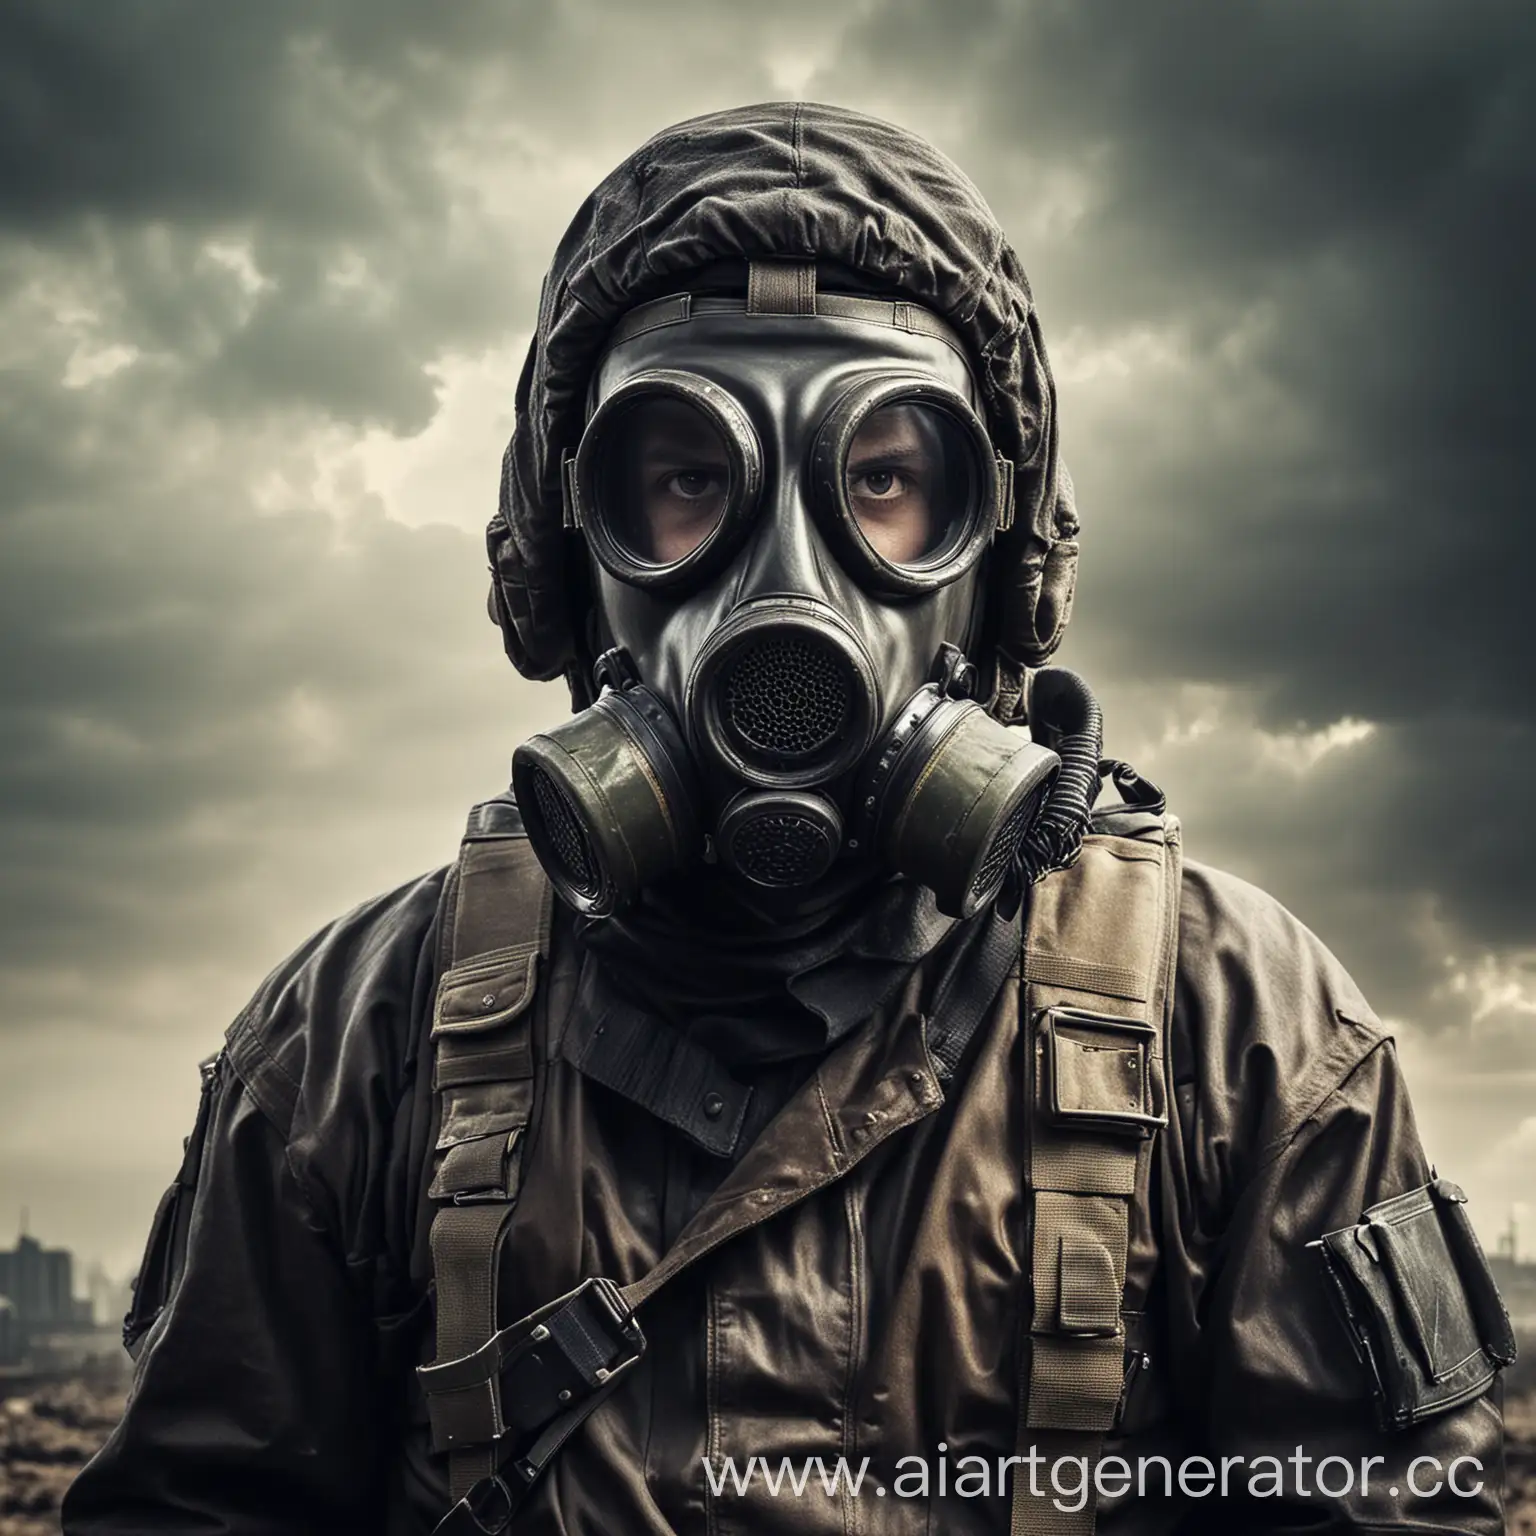 PostNuclear-Apocalyptic-Survivor-in-Gas-Mask-and-Protective-Gear